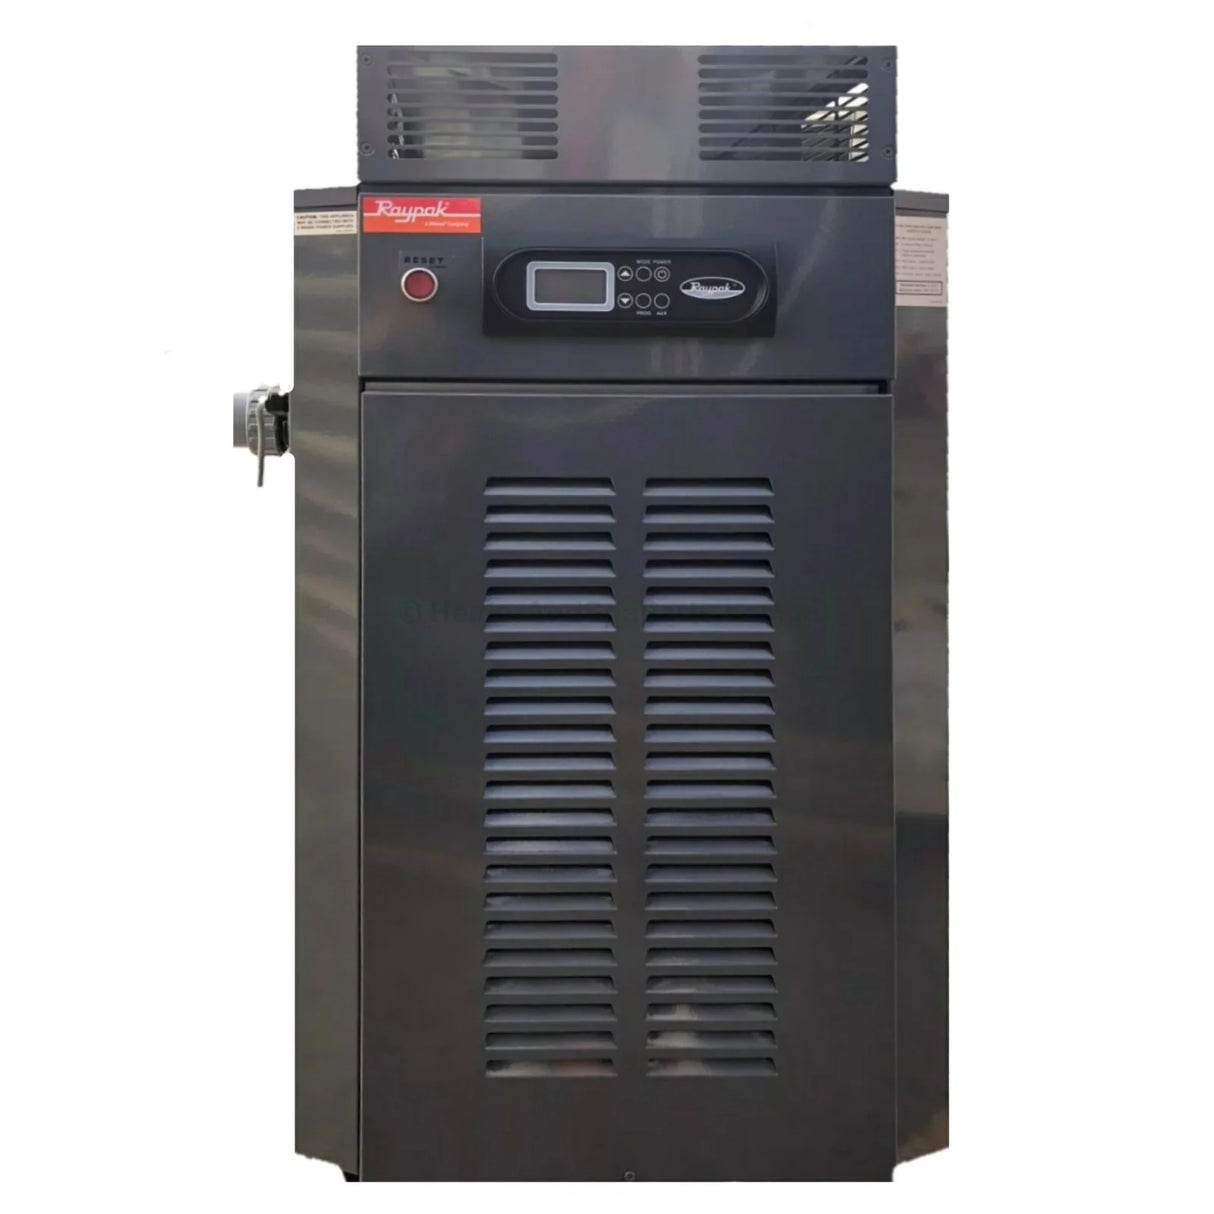 Raypak 350 Gas Pool & Spa Heater - Heater and Spa Parts